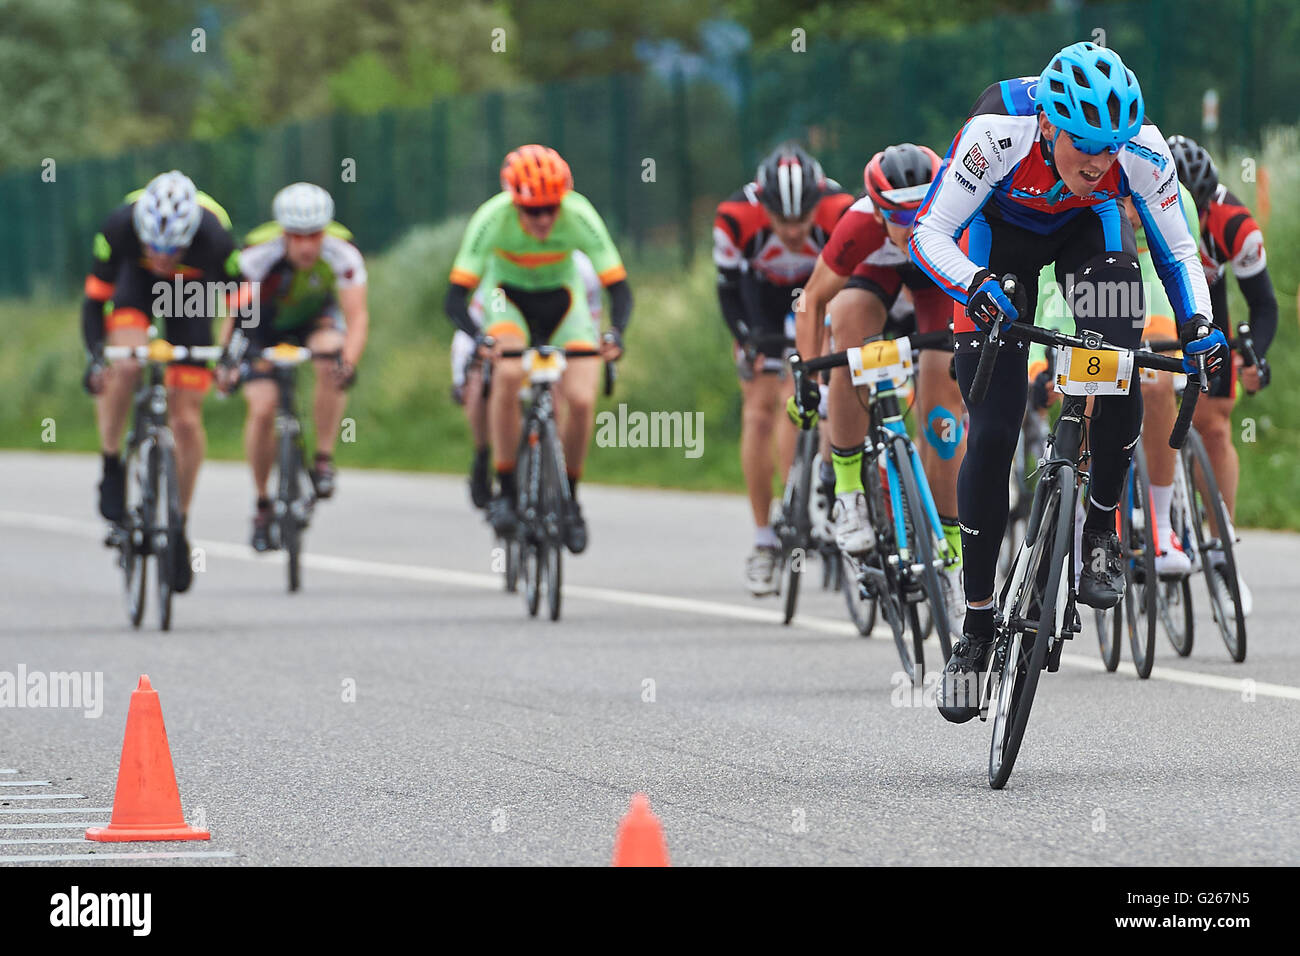 Cazis, Switzerland. May 24, 2016. Riders compete during the Criterium Race of the Cycling Grison Cup Series in Cazis. Credit:  Rolf Simeon/Alamy Live News. Stock Photo